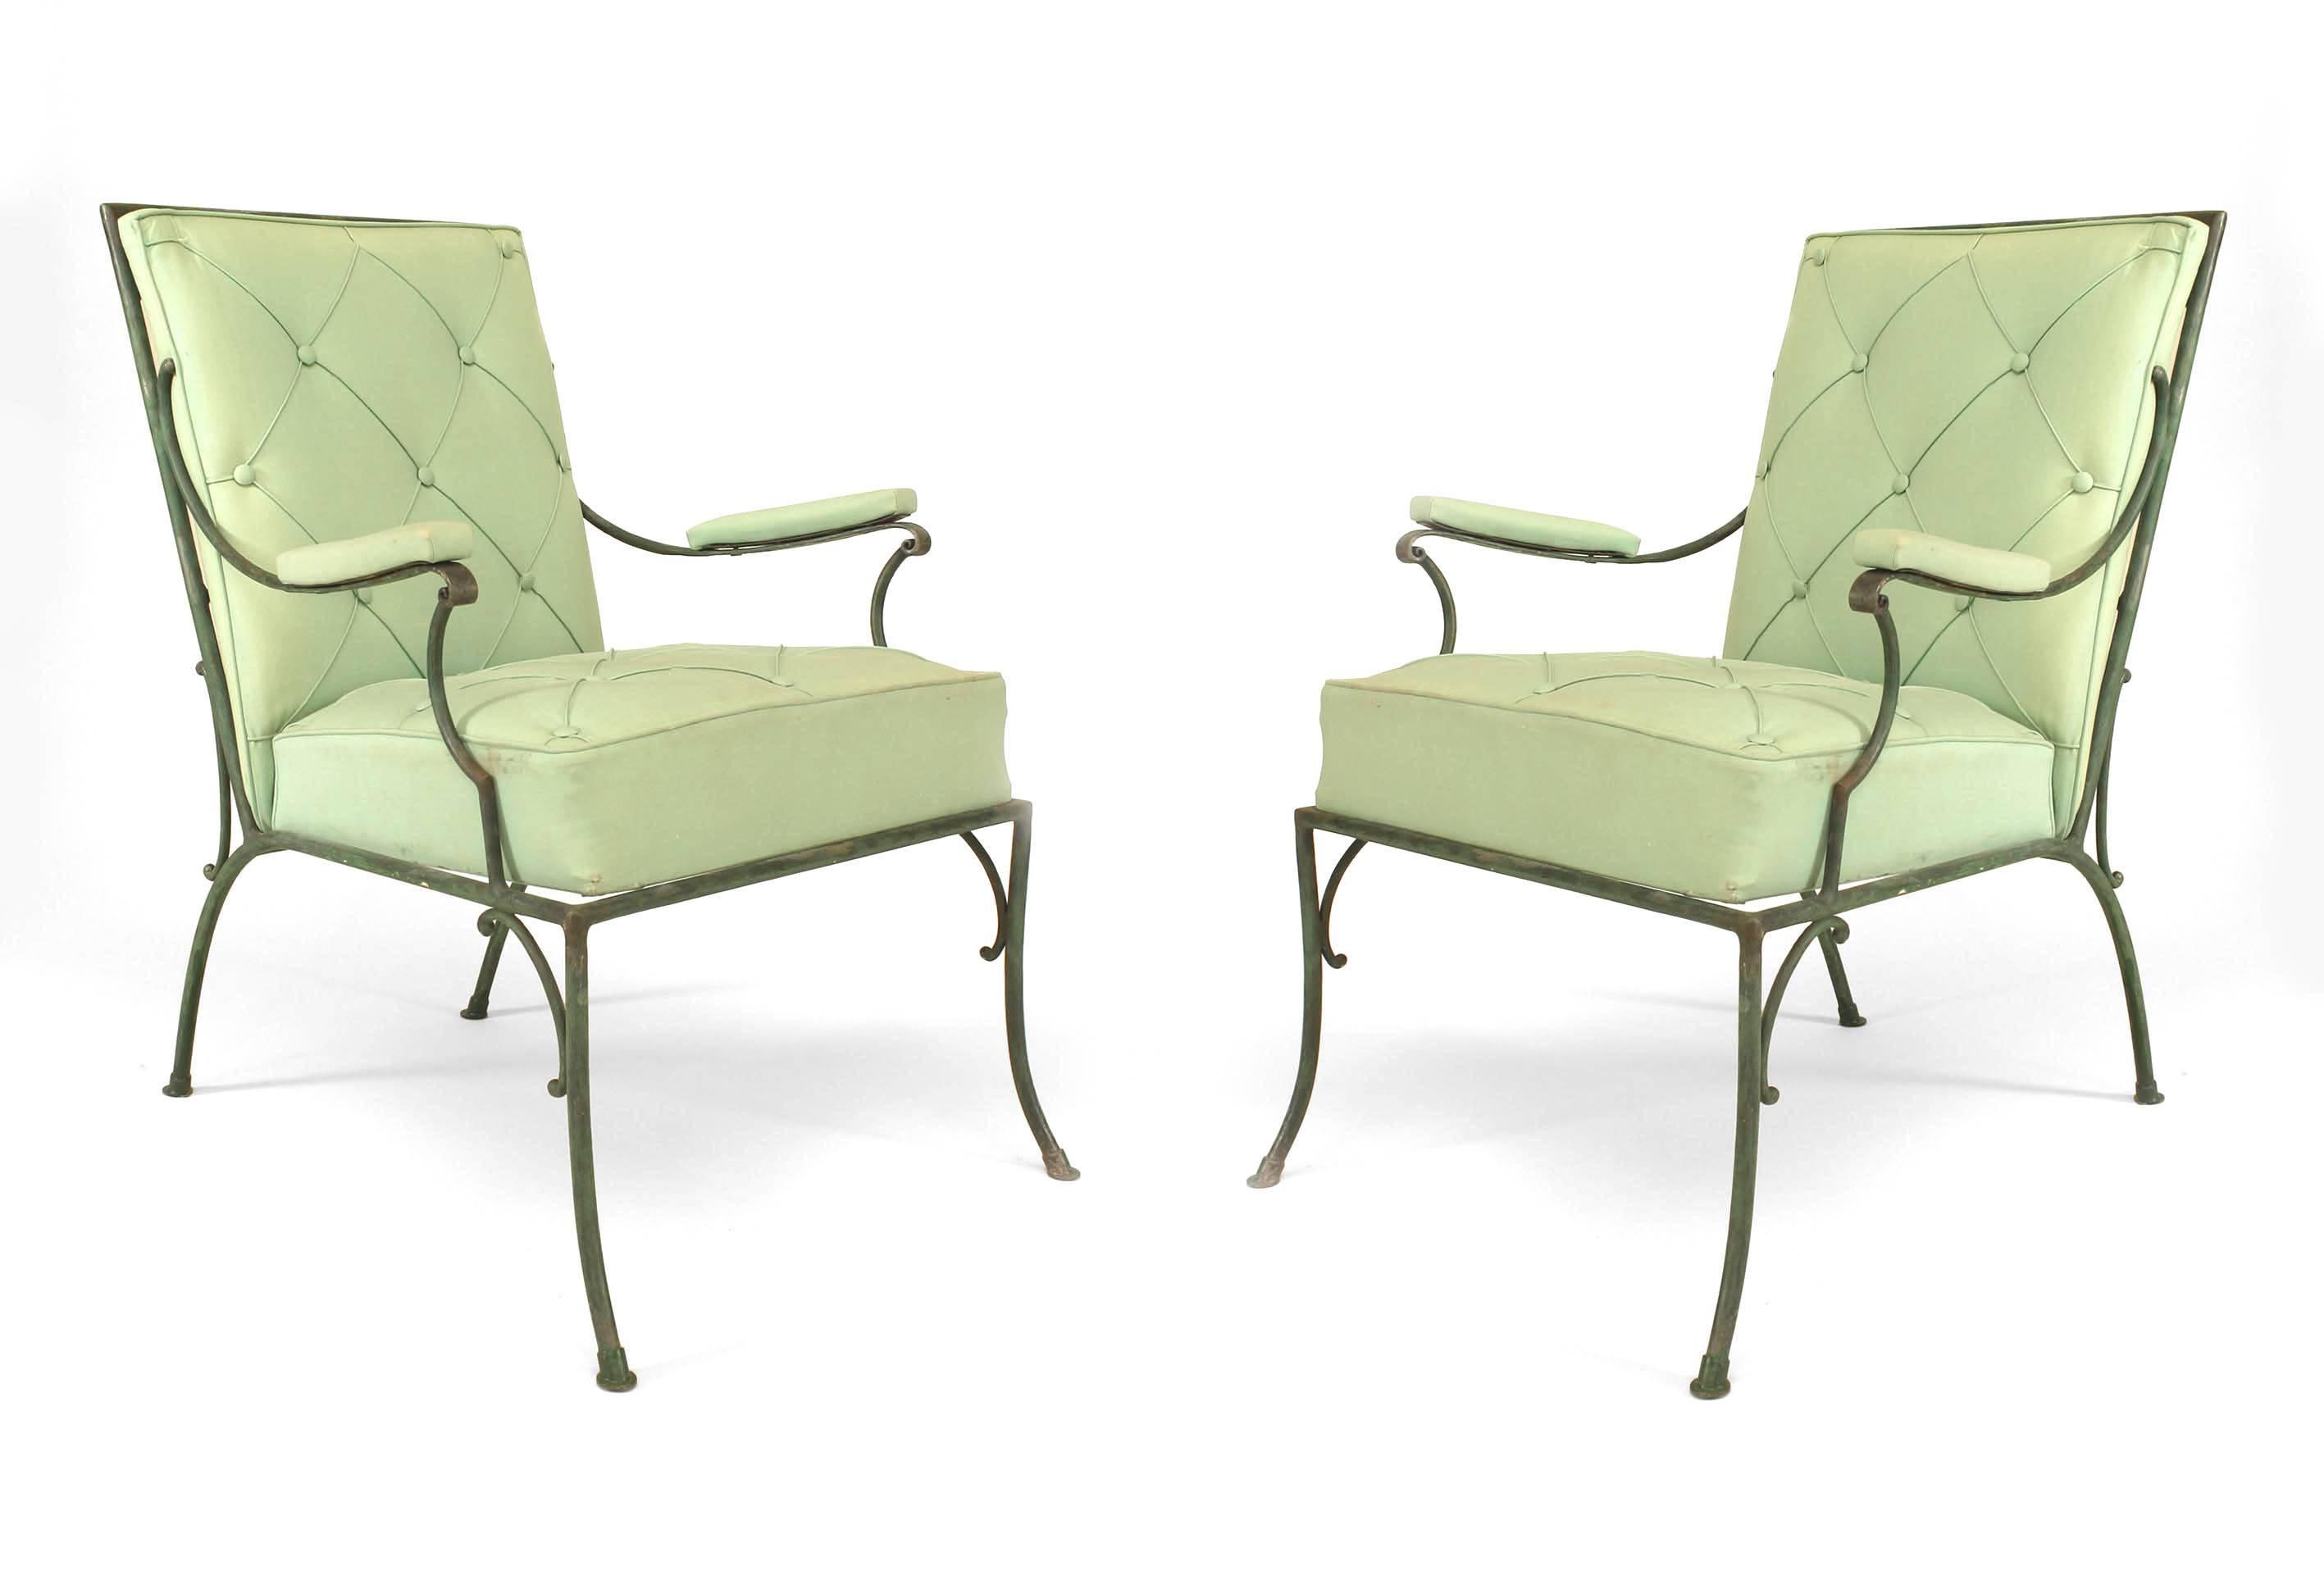 Pair of French 1940s green painted iron Armchairs with green cotton buttoned cushions
